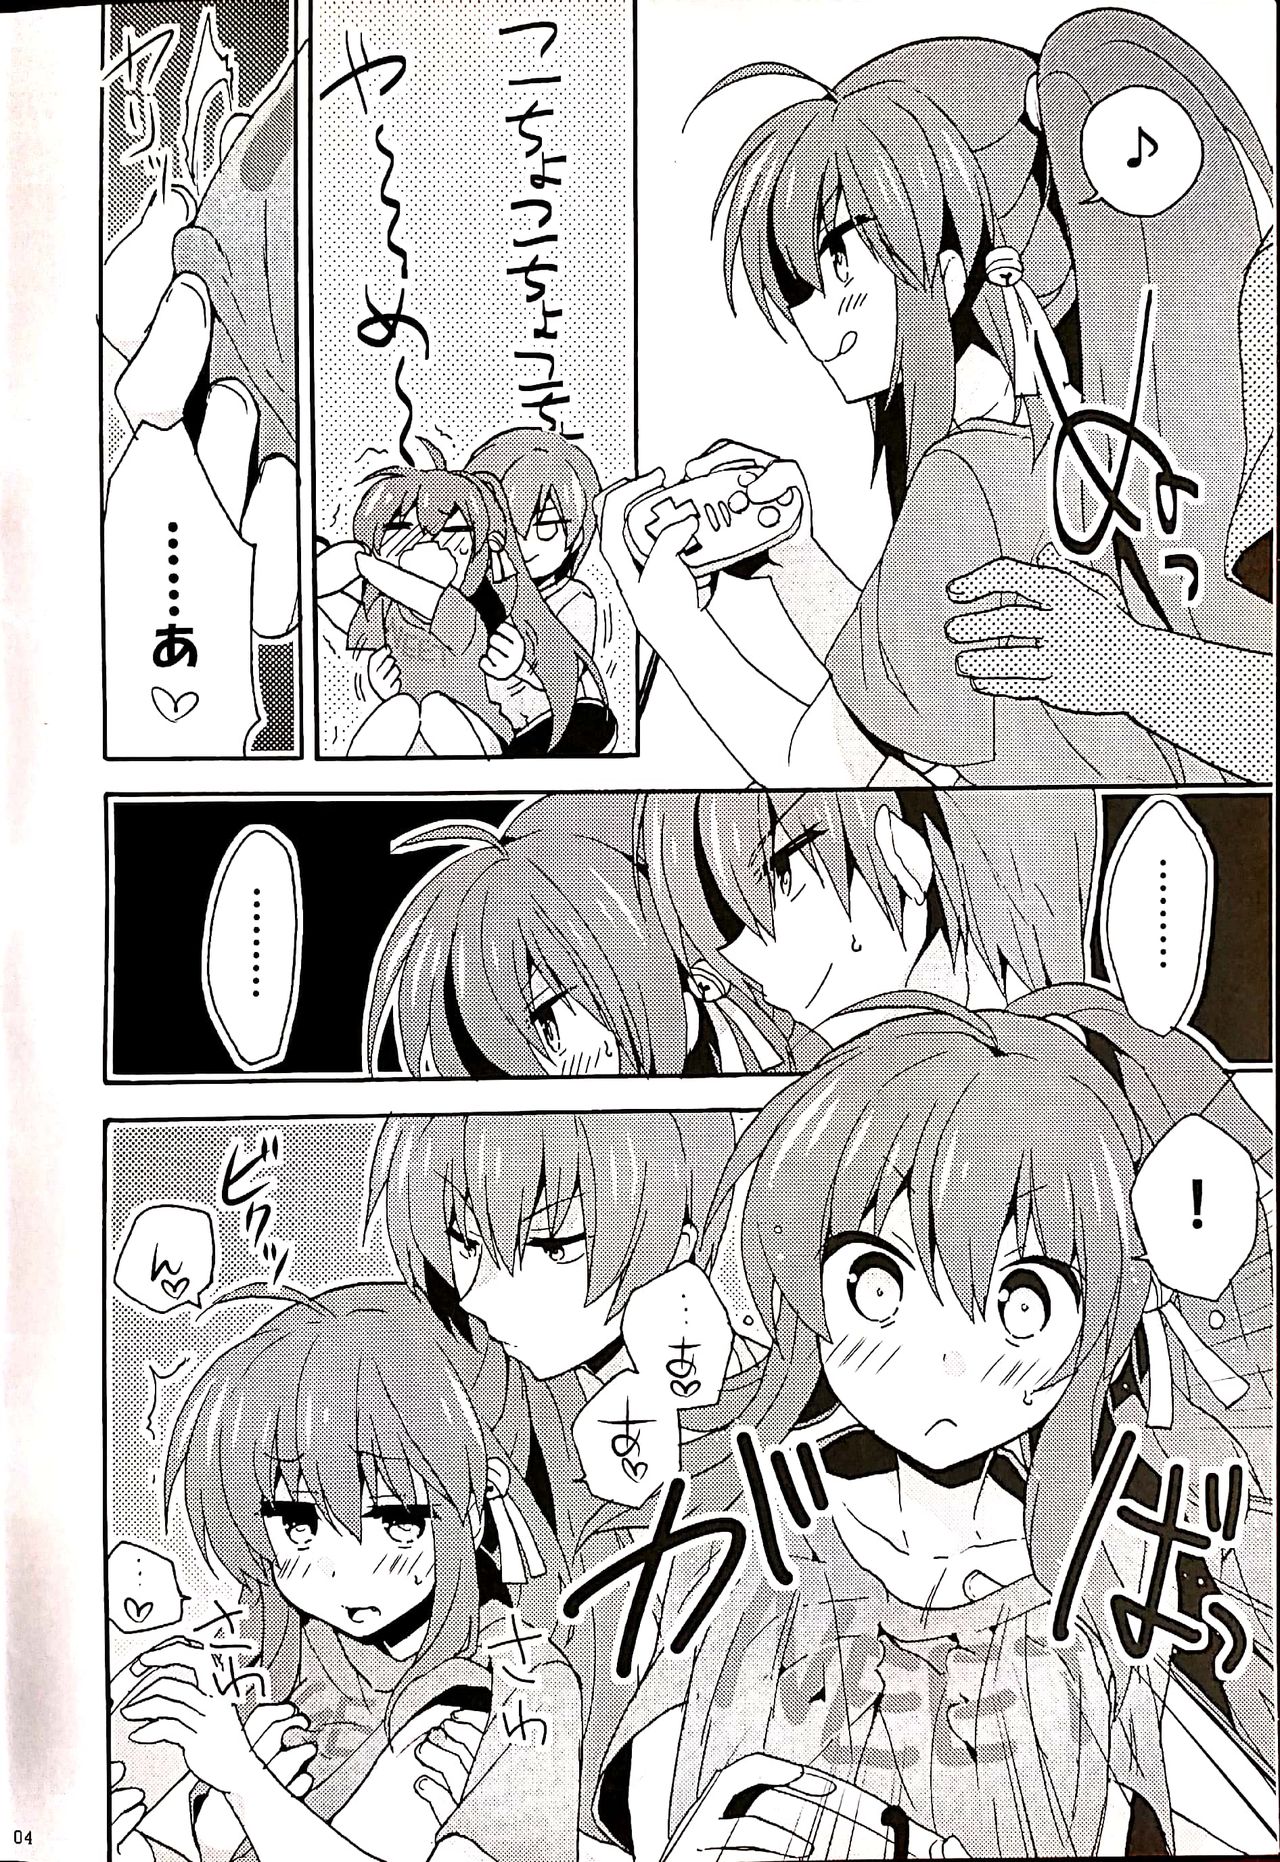 (KeyPoints5) [keepON (Hano Haruka)] 2P (Little Busters!) page 3 full